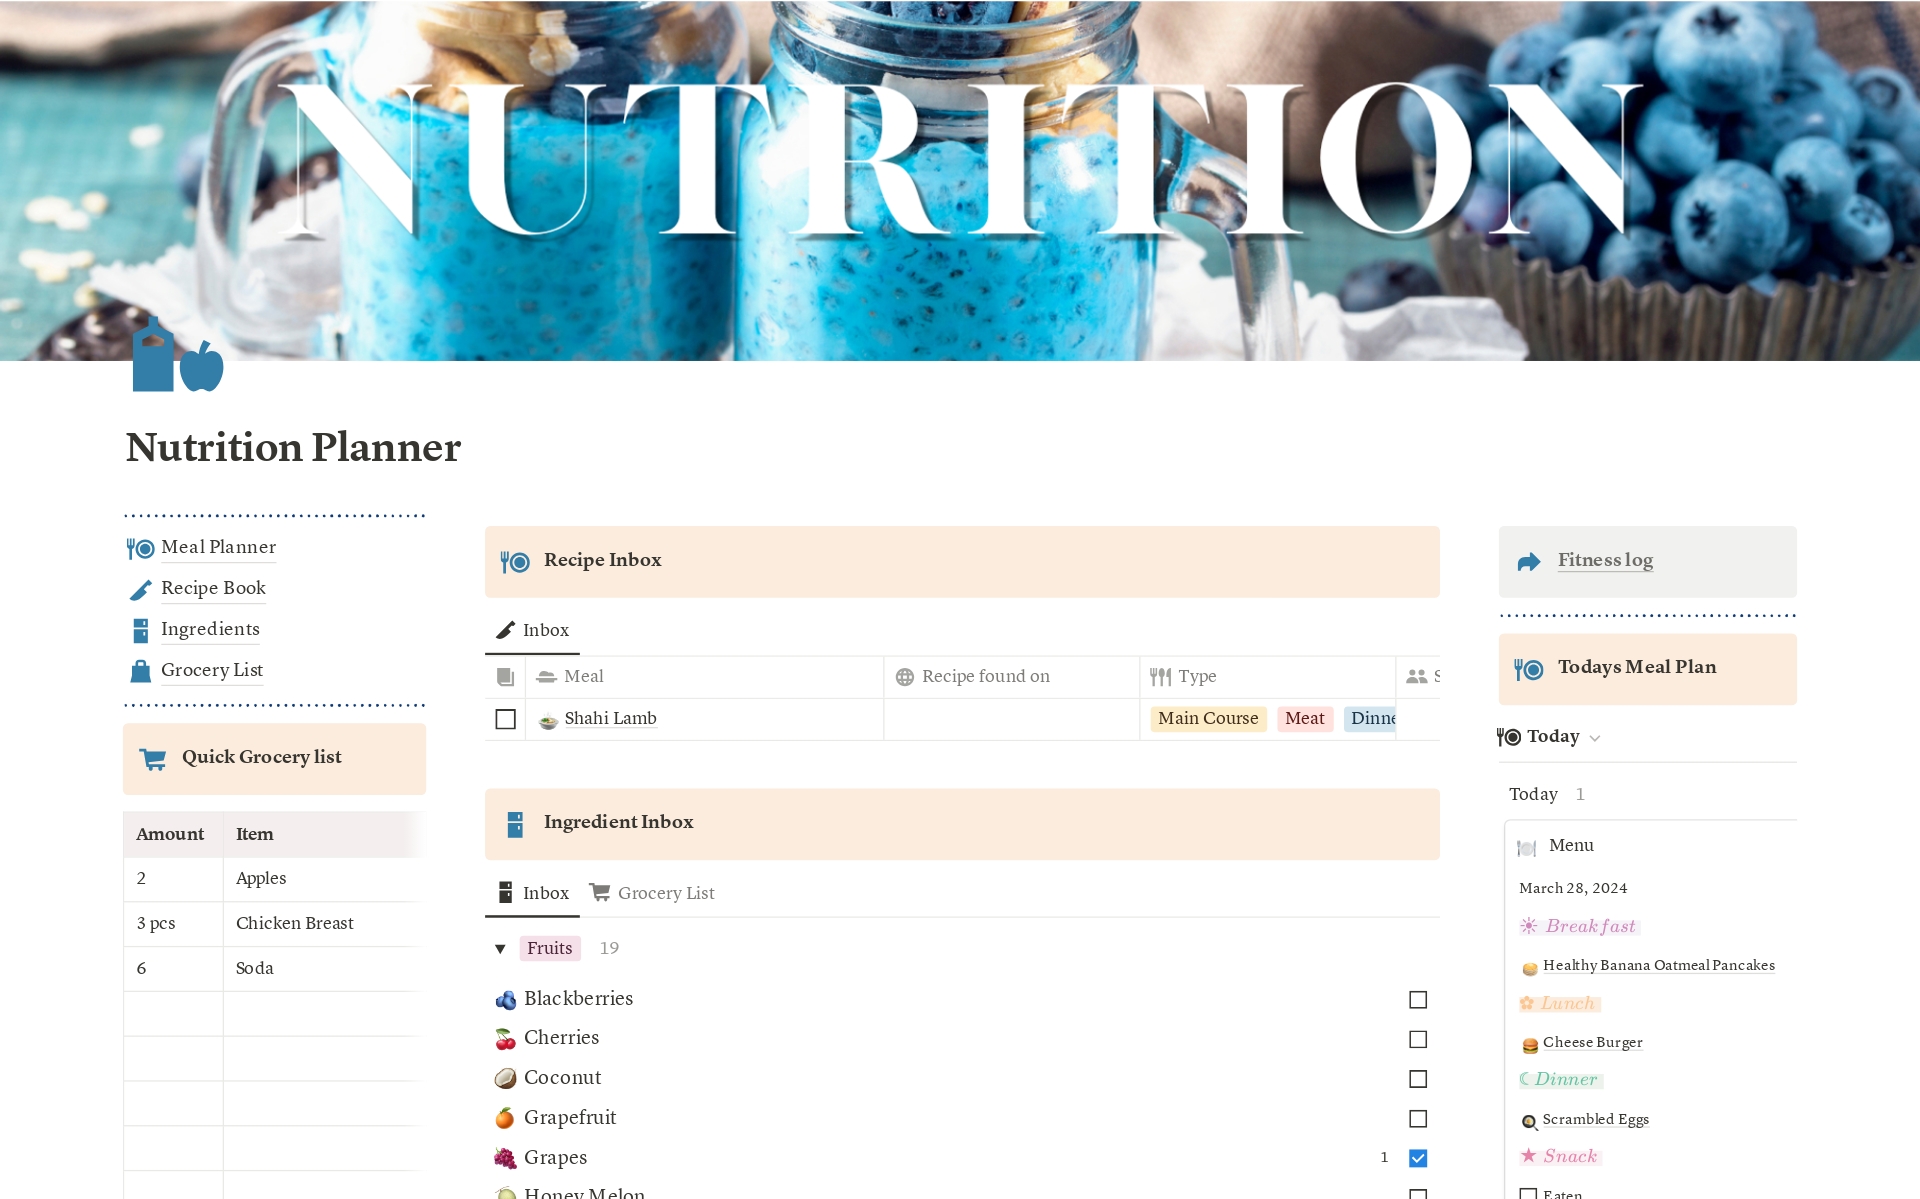 The Nutrition Planner is a comprehensive tool designed for meal planning, recipe management, grocery shopping, and tracking ingredients. Ideal for personal or family use to simplify diet management.